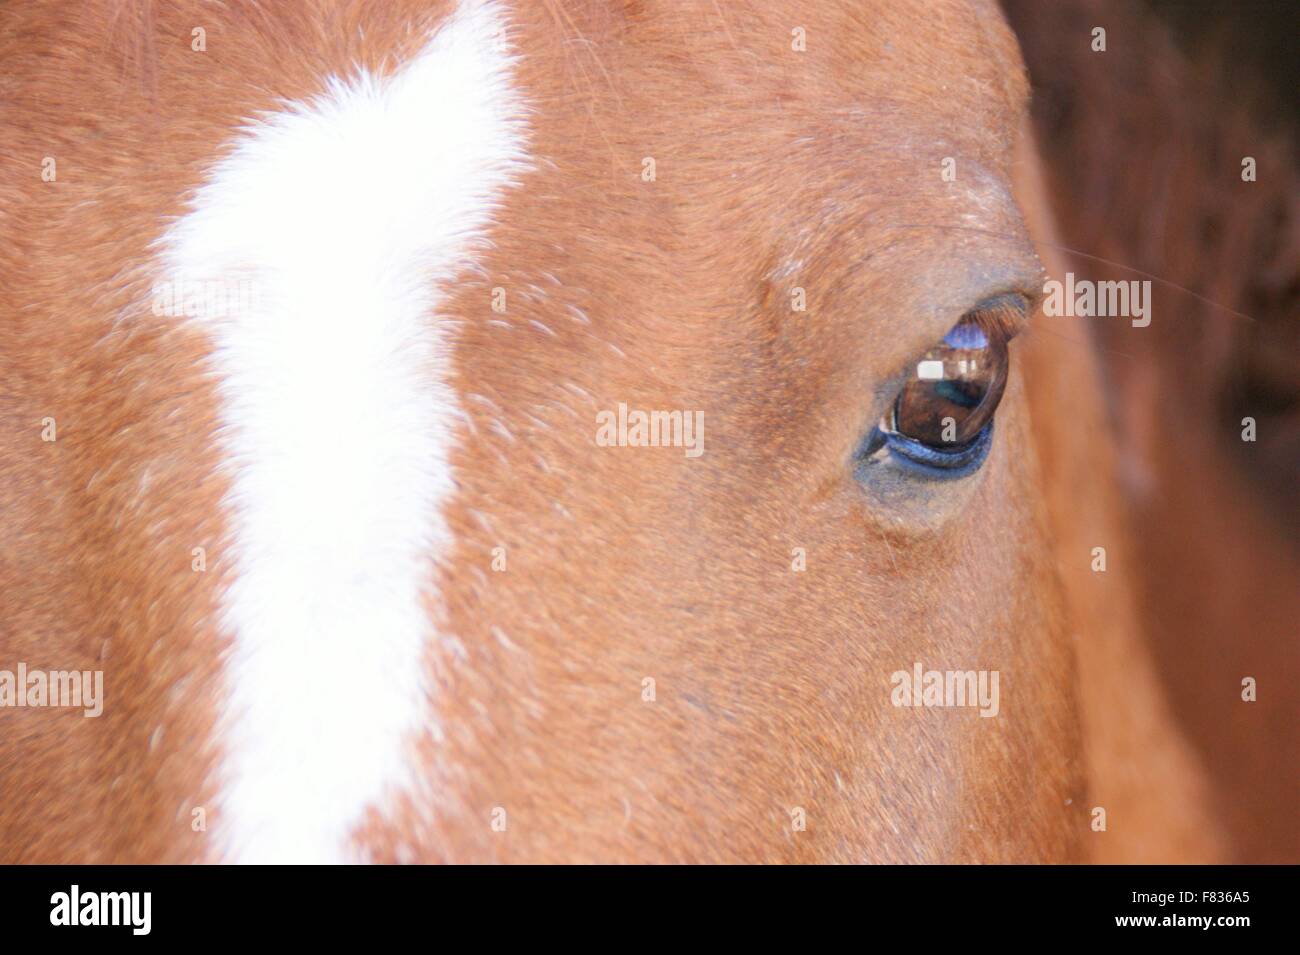 Close up of horses face Stock Photo